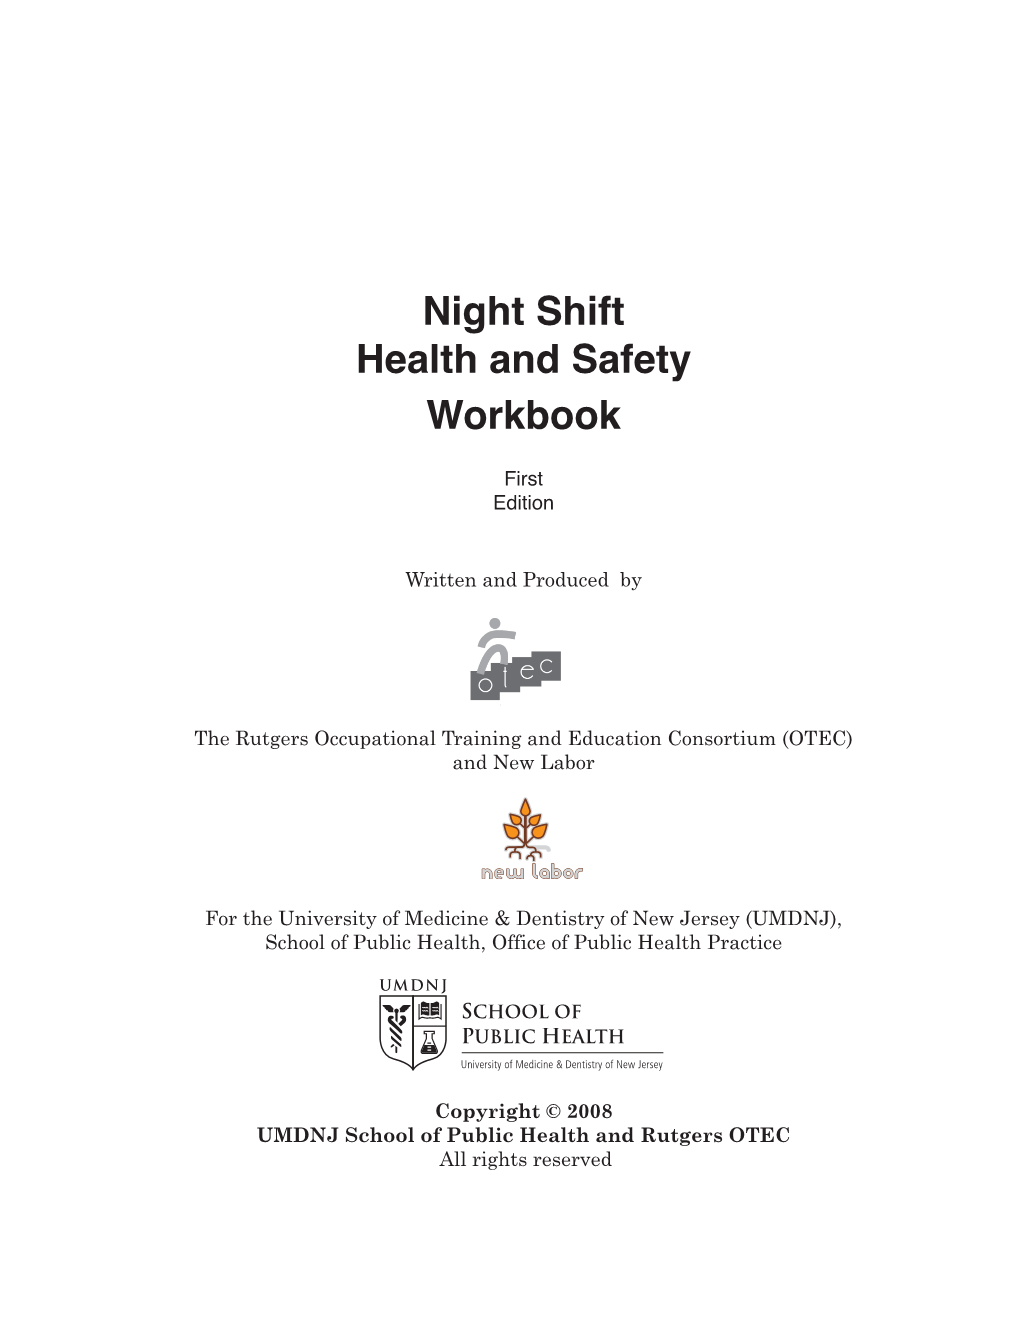 Night Shift Health and Safety Workbook